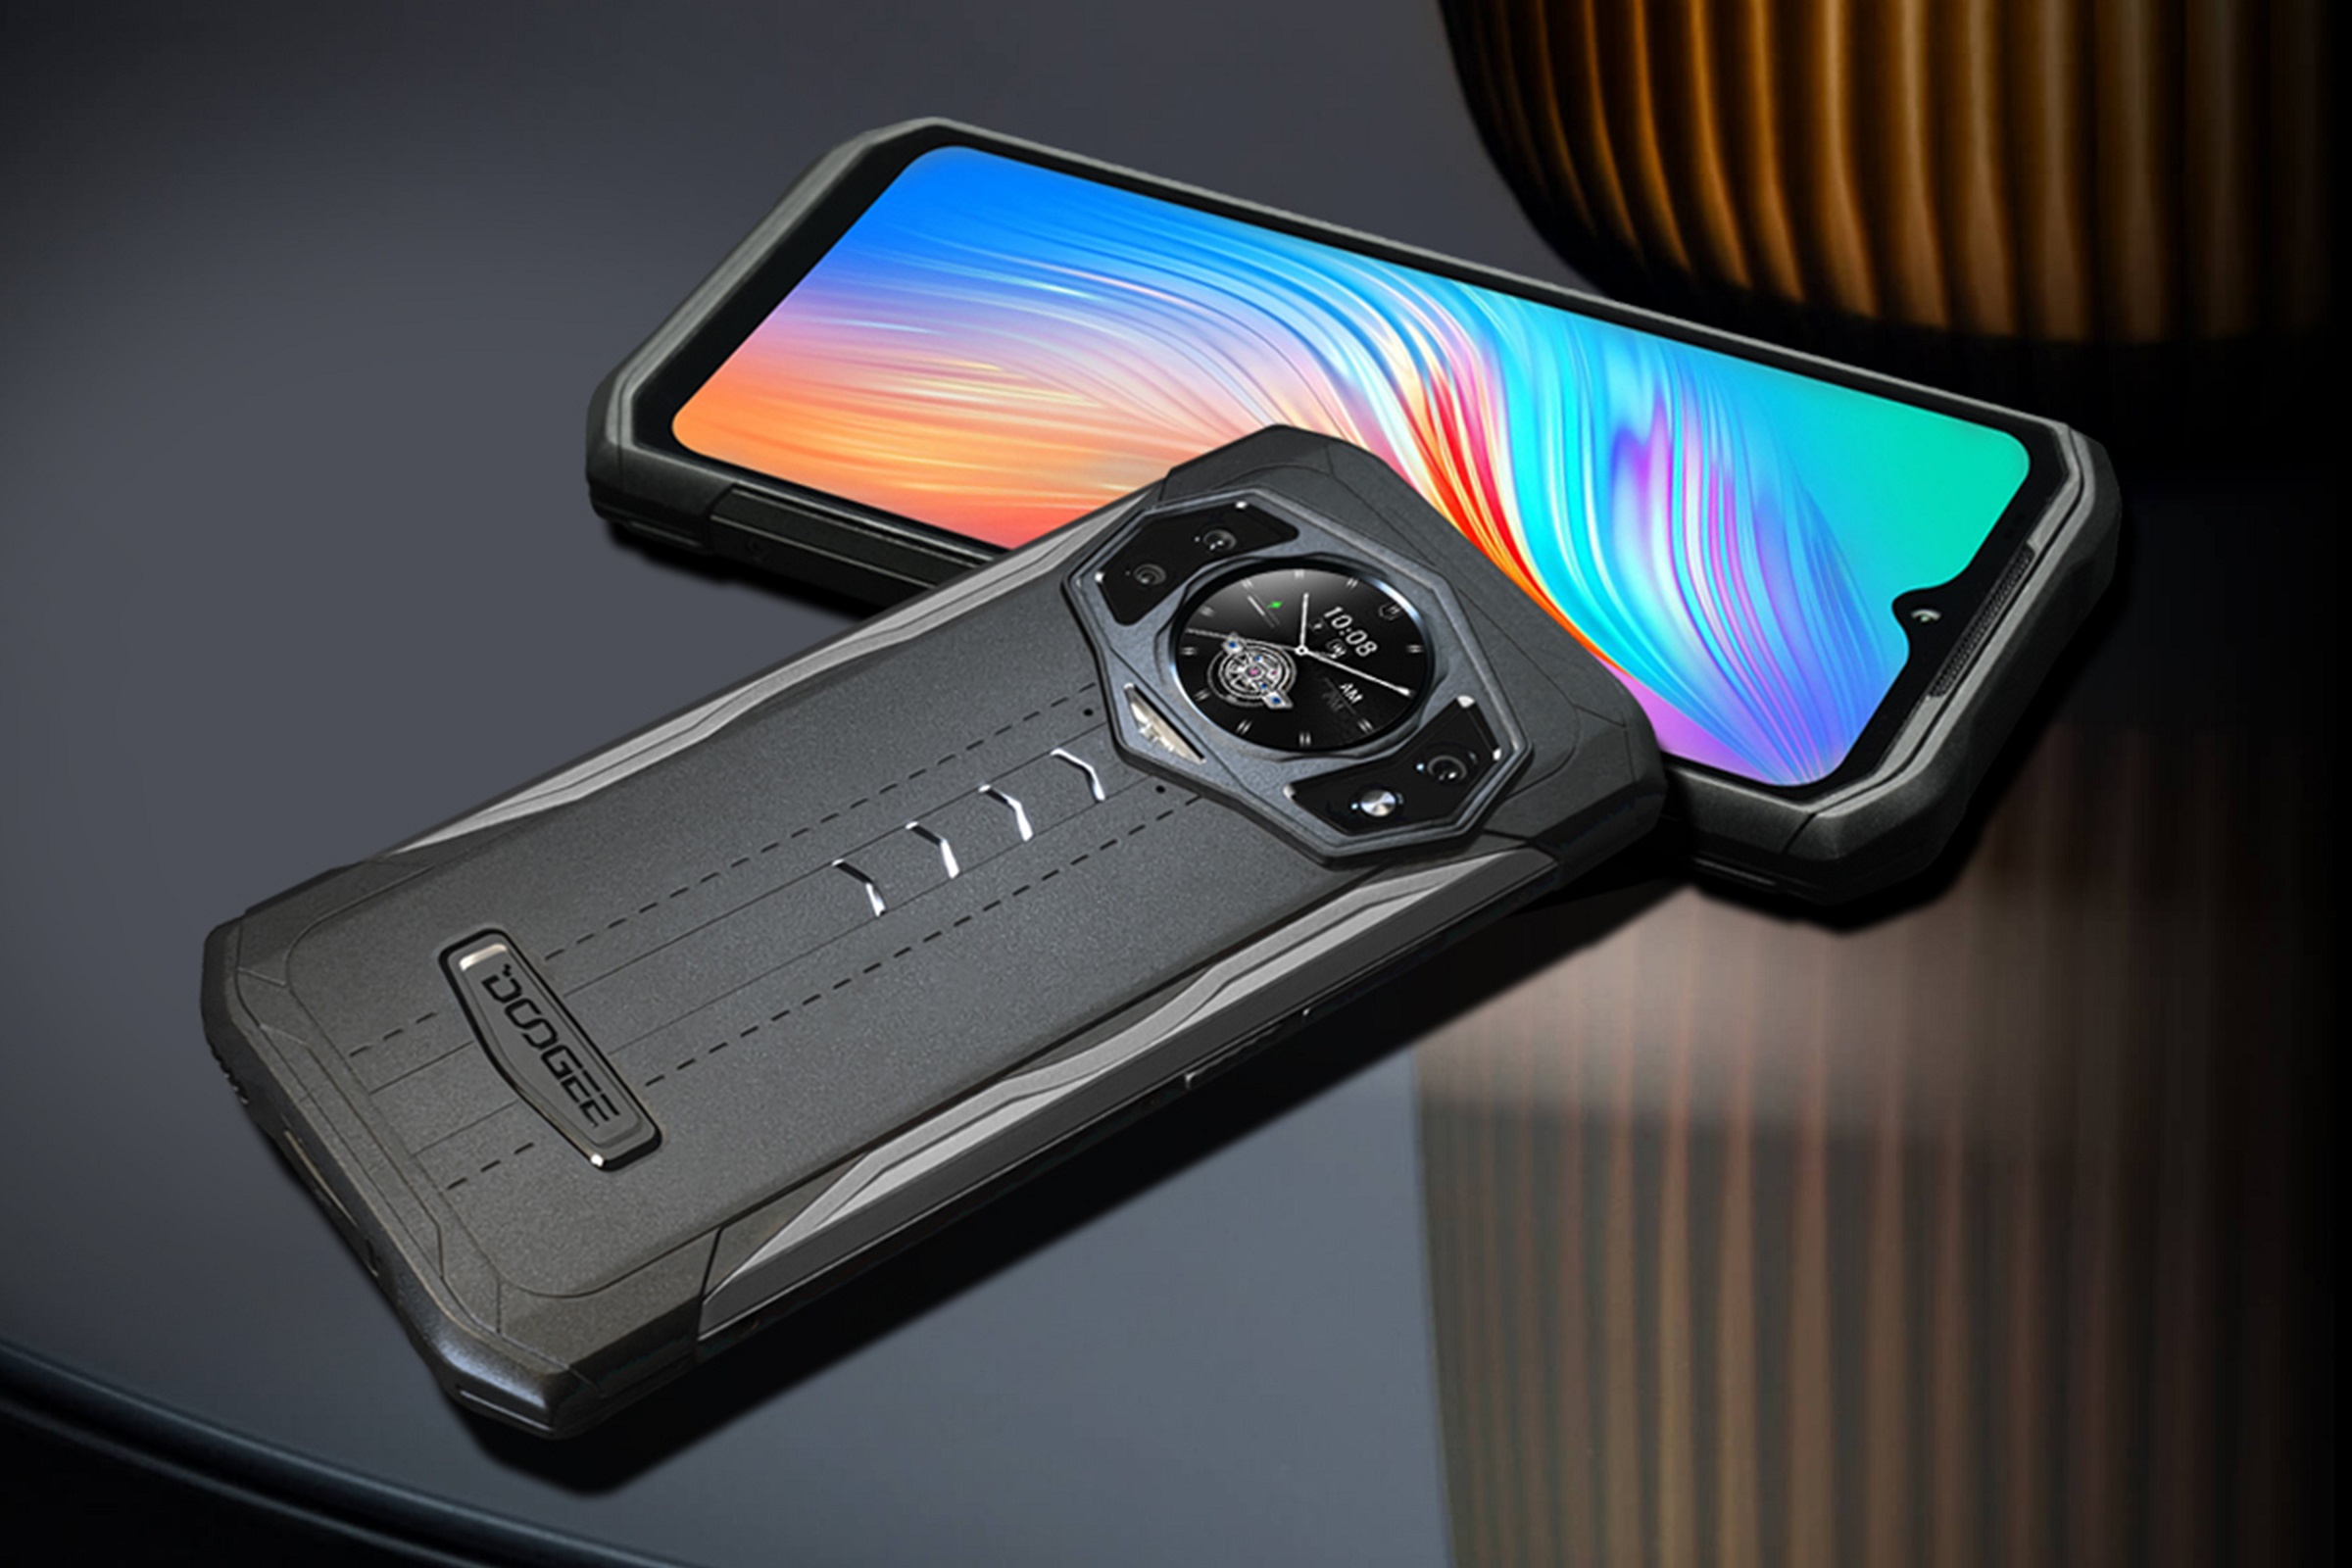 The new Doogee S98 with Dual Screen and Night Vision set to launch on March 28th